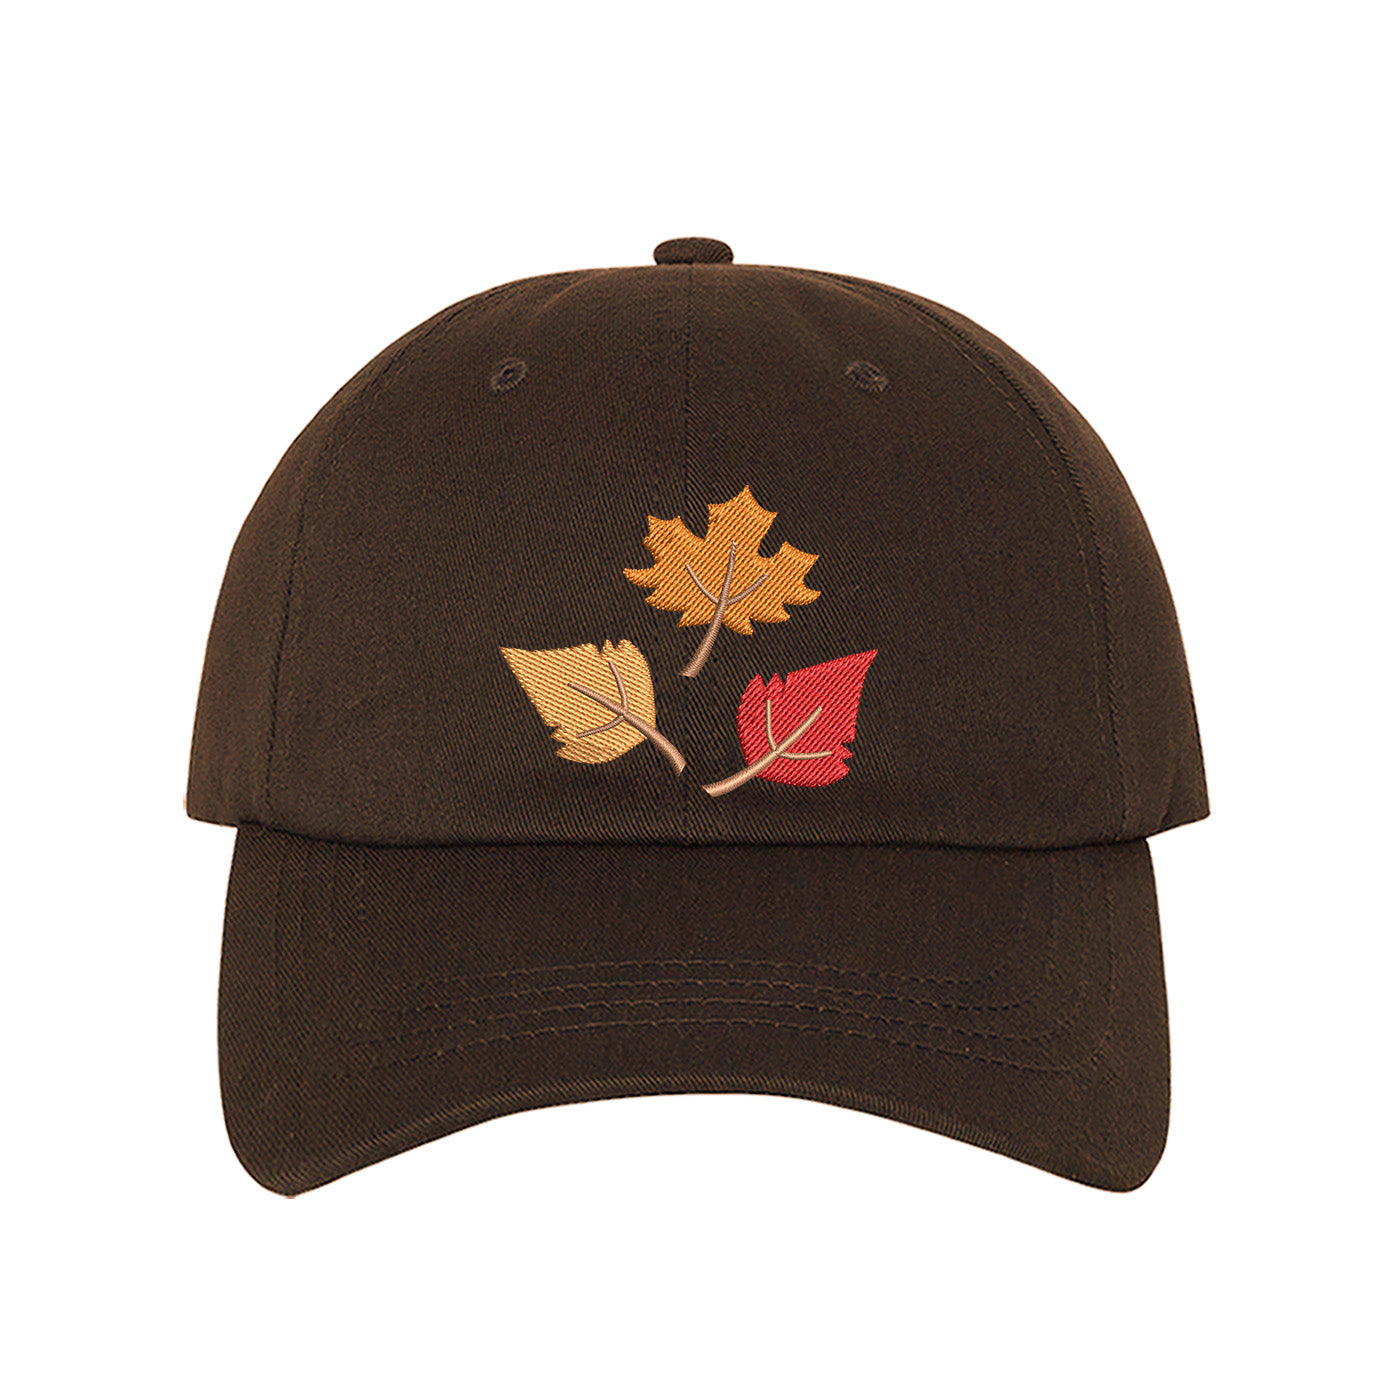 Brown baseball cap embroidered with Leaves - DSY Lifestyle